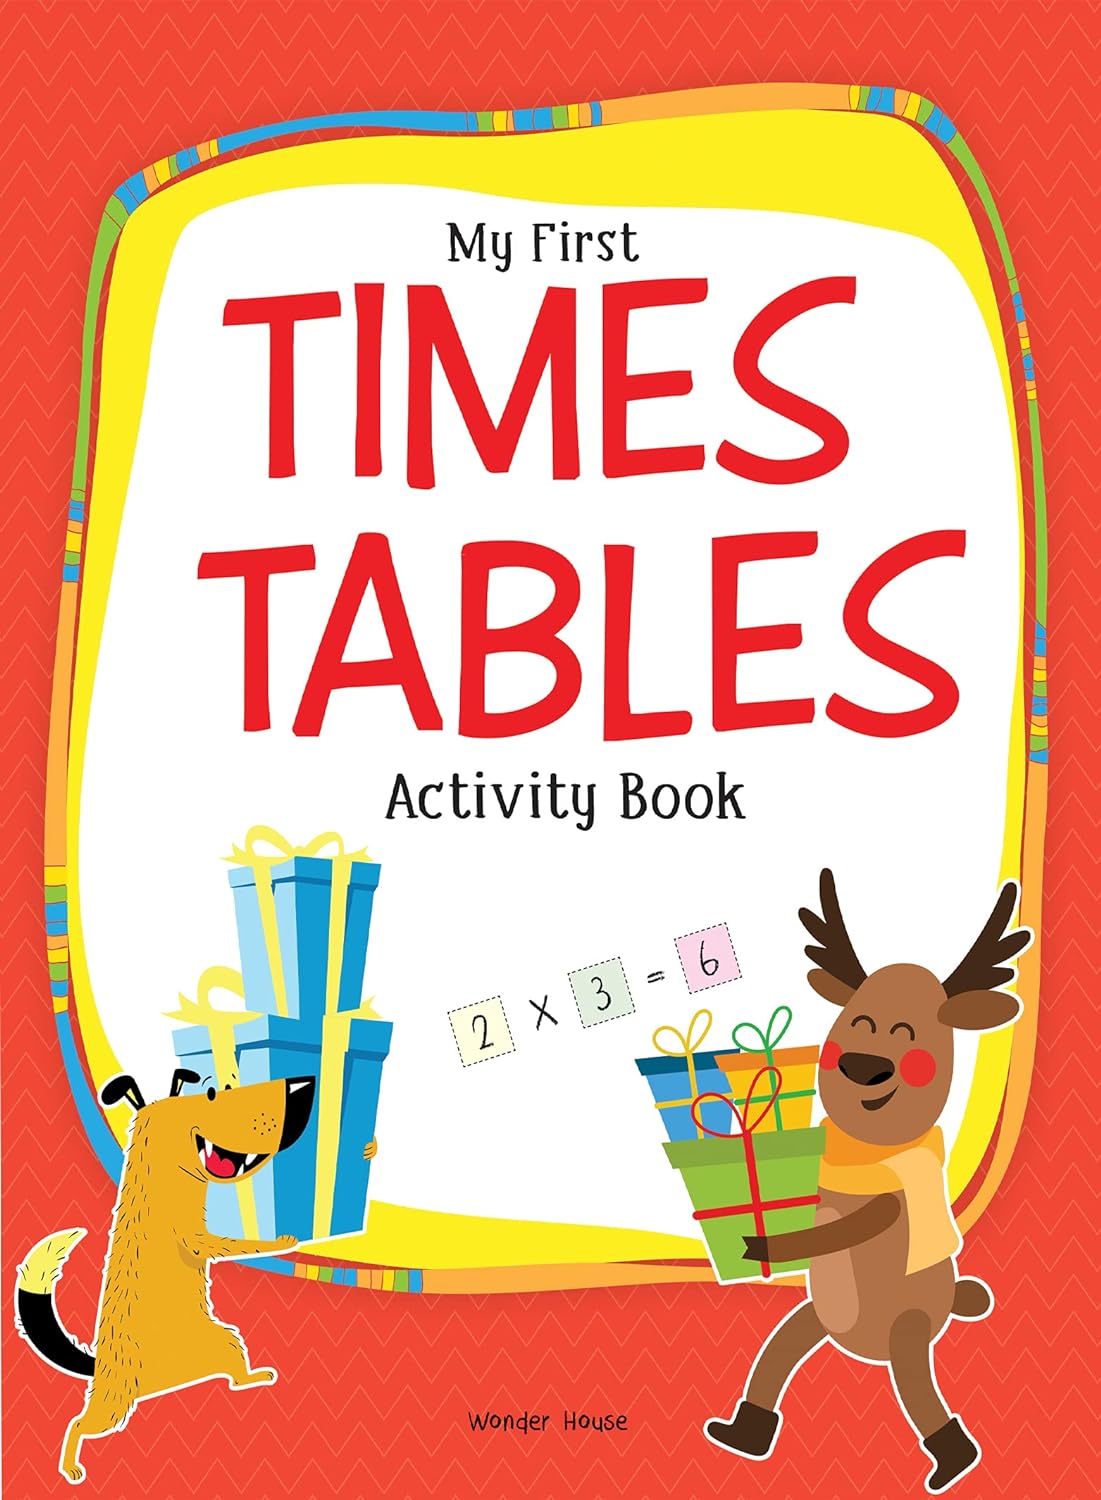 My First Times Tables Activity Book